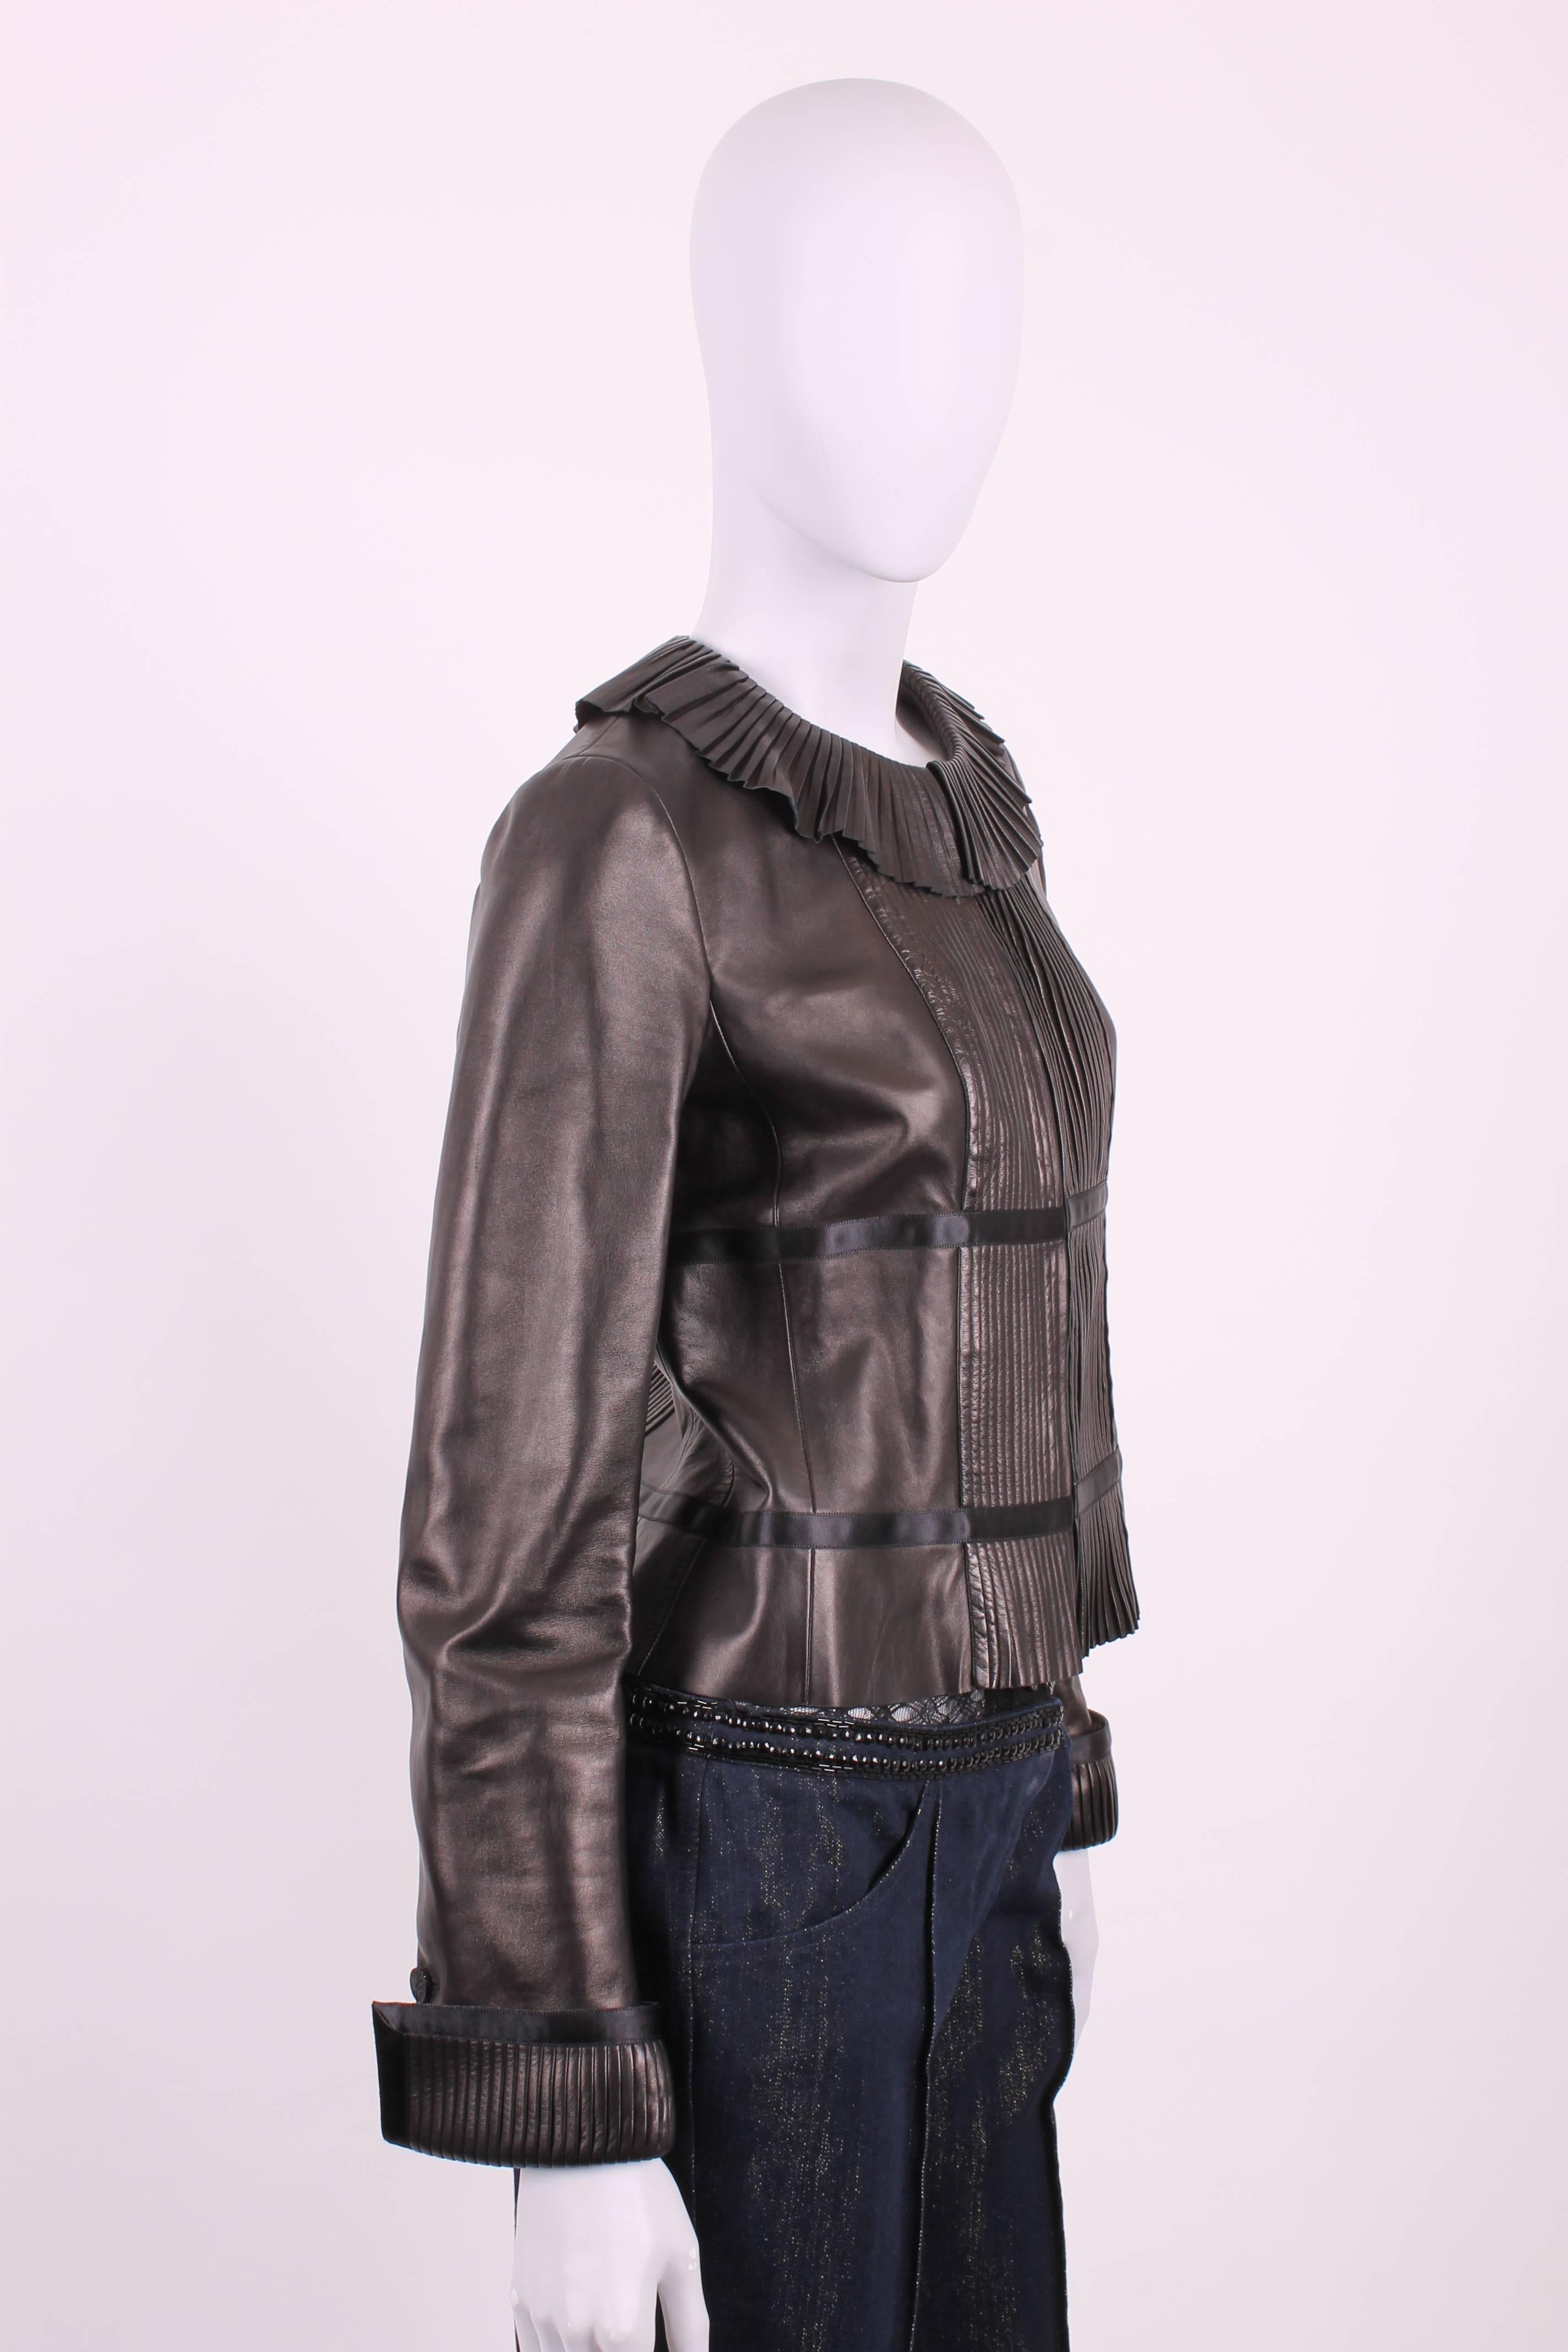 Light and supple lambskin leather jacket by Chanel, stylish and sophisticated.

A round pleated collar, long zip closure. The part next to the zipper, the middle of the back and the fold-over at the sleeves are also pleated. Three matte black